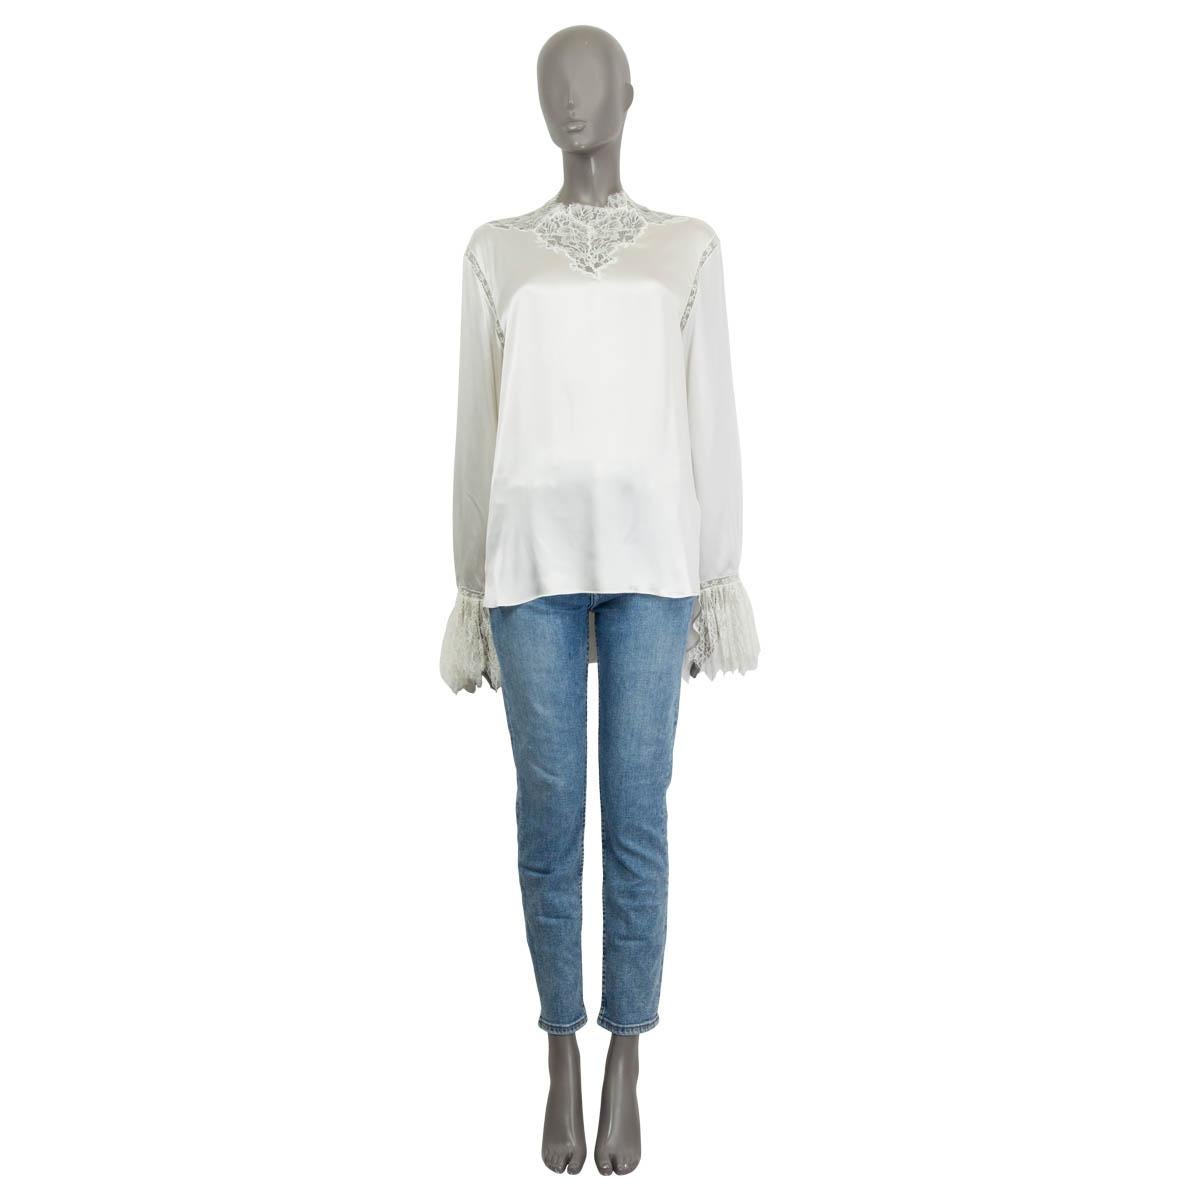 100% authentic Ermanno Scervino satin long sleeve blouse in ivory silk (100%). Embellished with lace details at the neck and ruched lace cuffs. Opens with three push buttons and six buttons on the back. Unlined. Has a barely visible small drawn